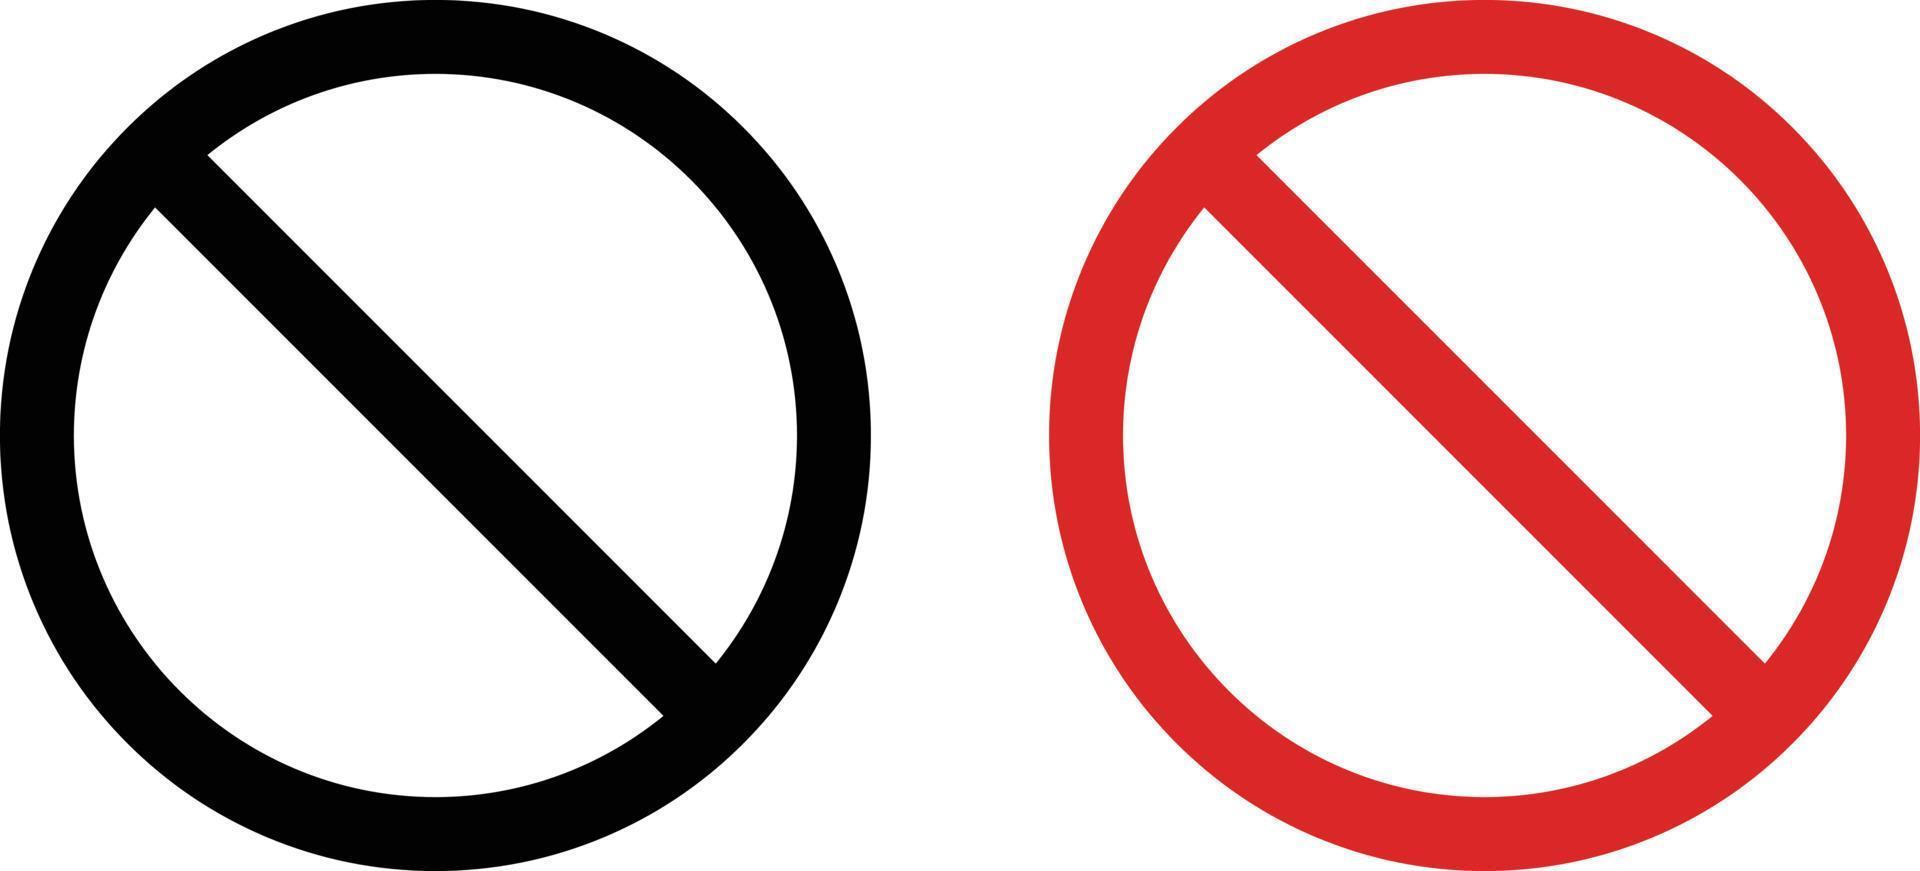 forbidden sign not allowed in red and black . ban icon symbol . stop entry sign . slash icon . prohibited mark vector